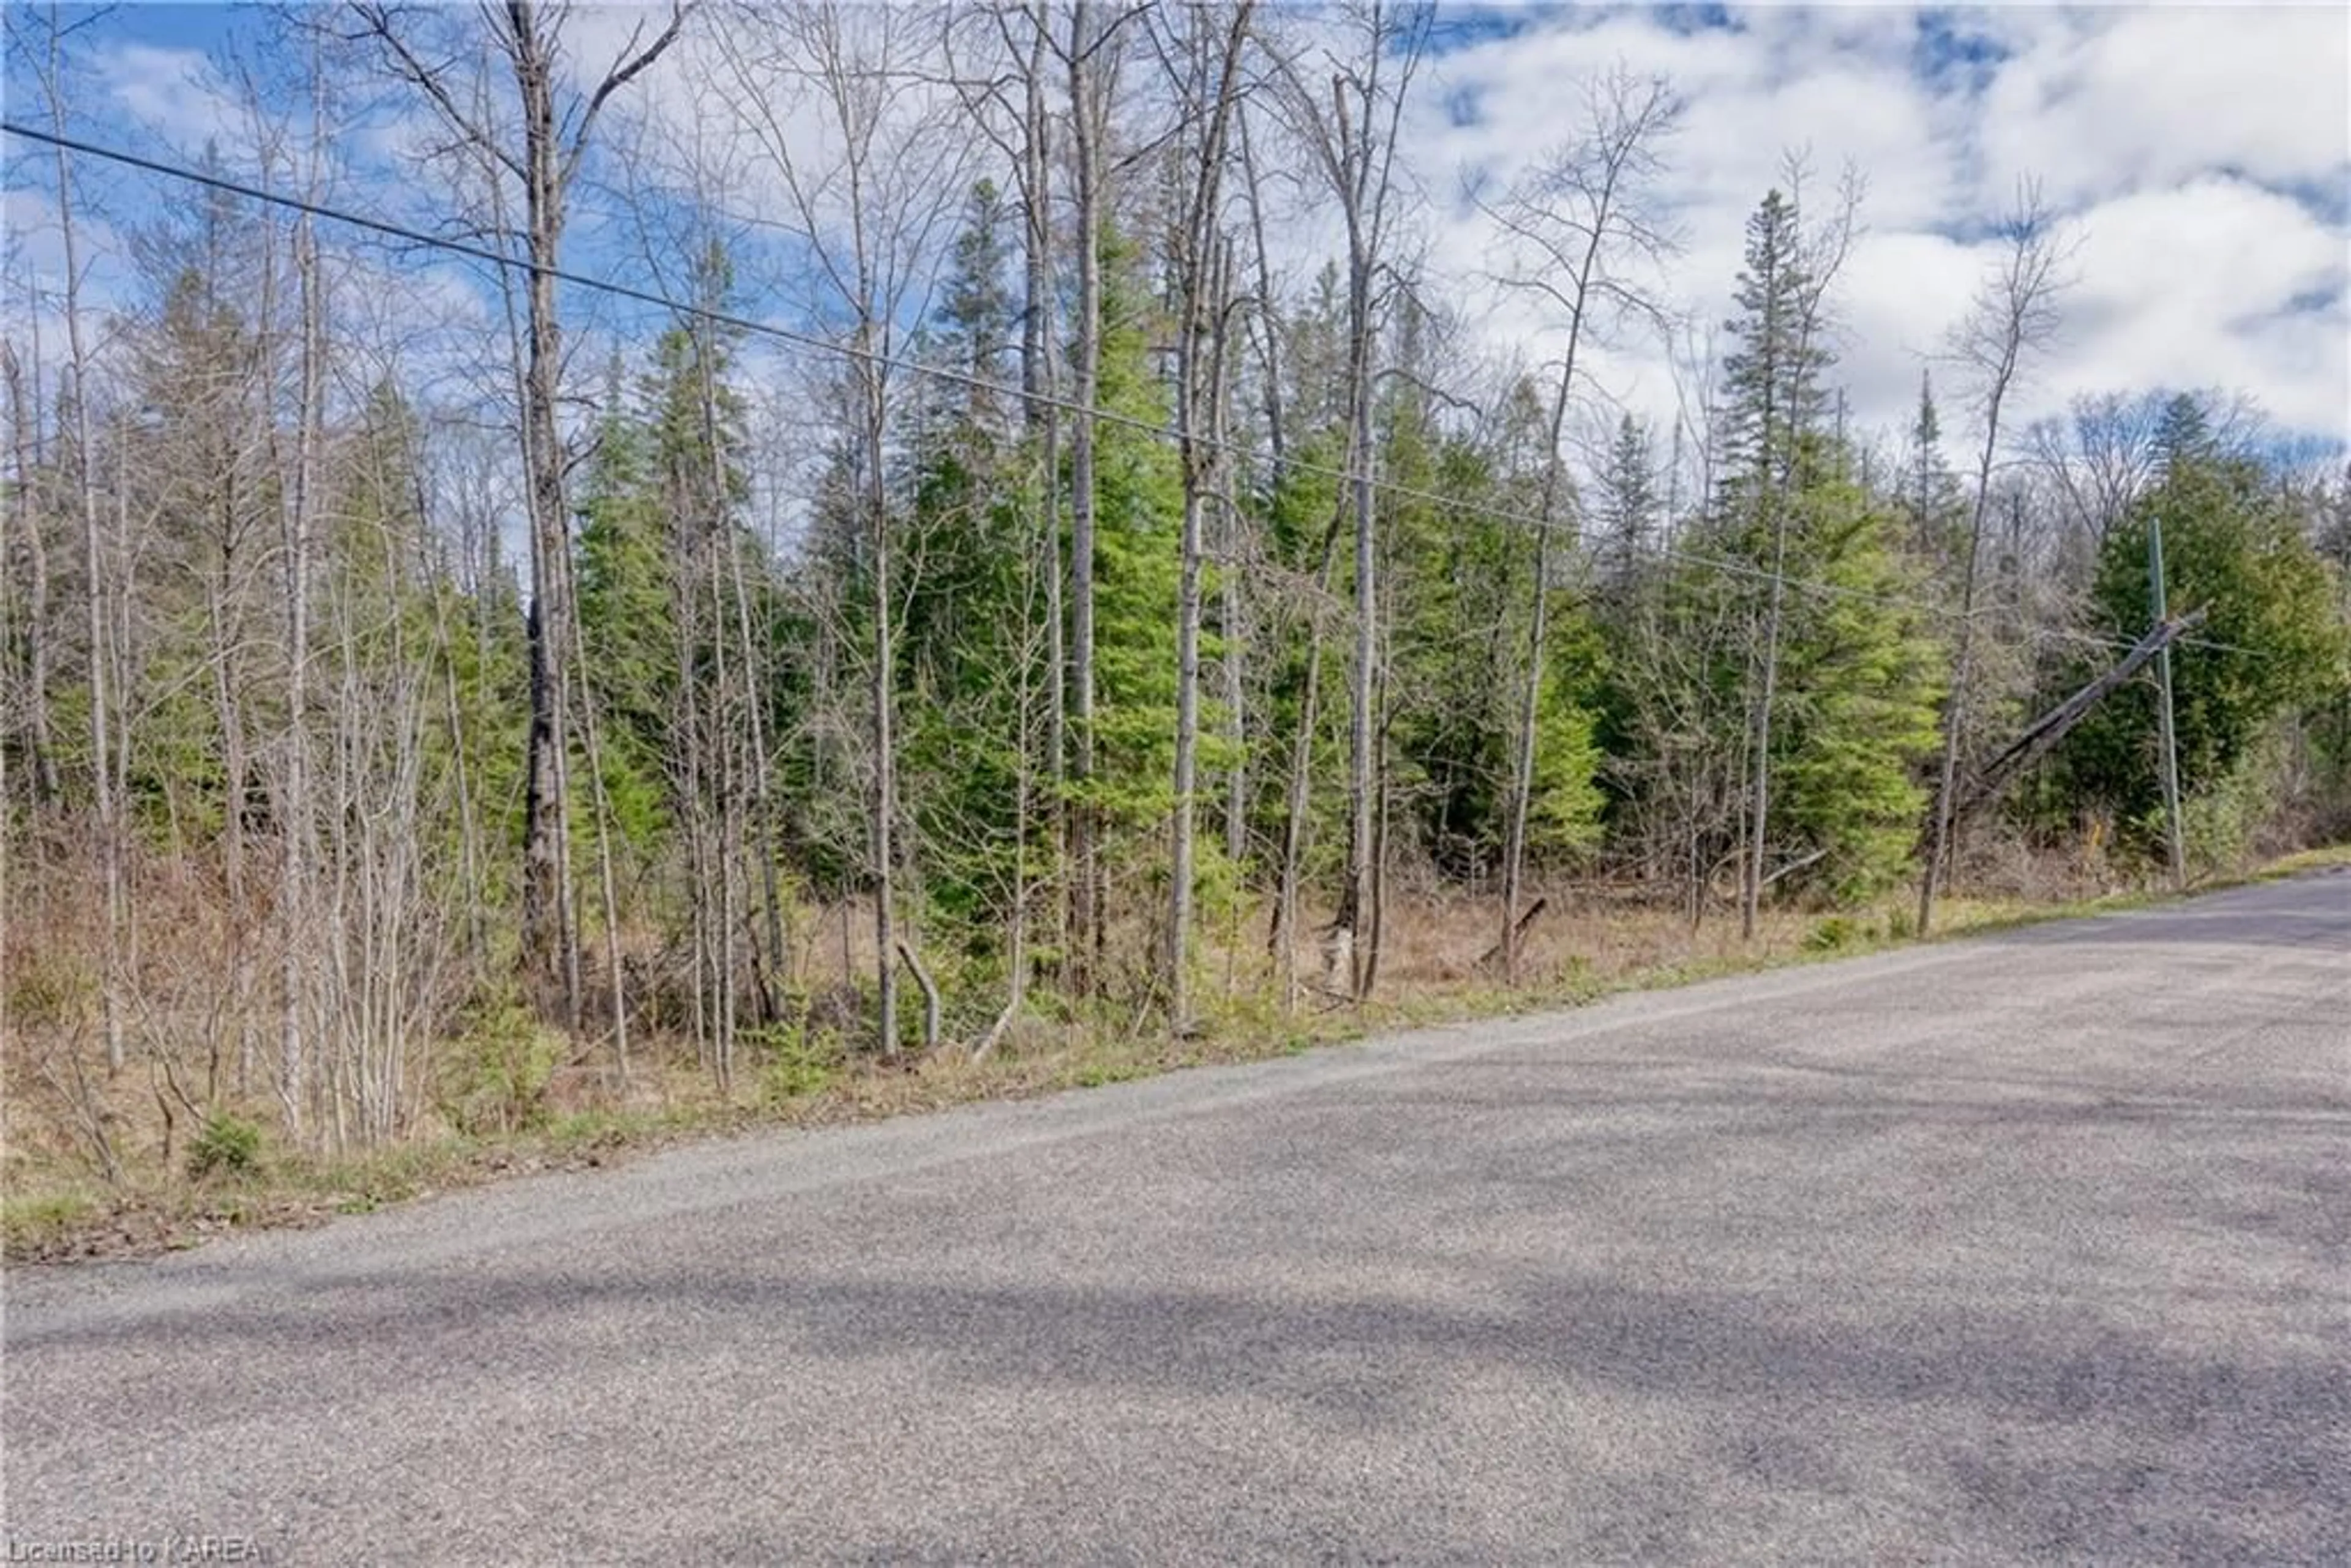 Forest view for PT LT 27 CON 8 S Lavant Rd, Ompah Ontario K0H 2J0